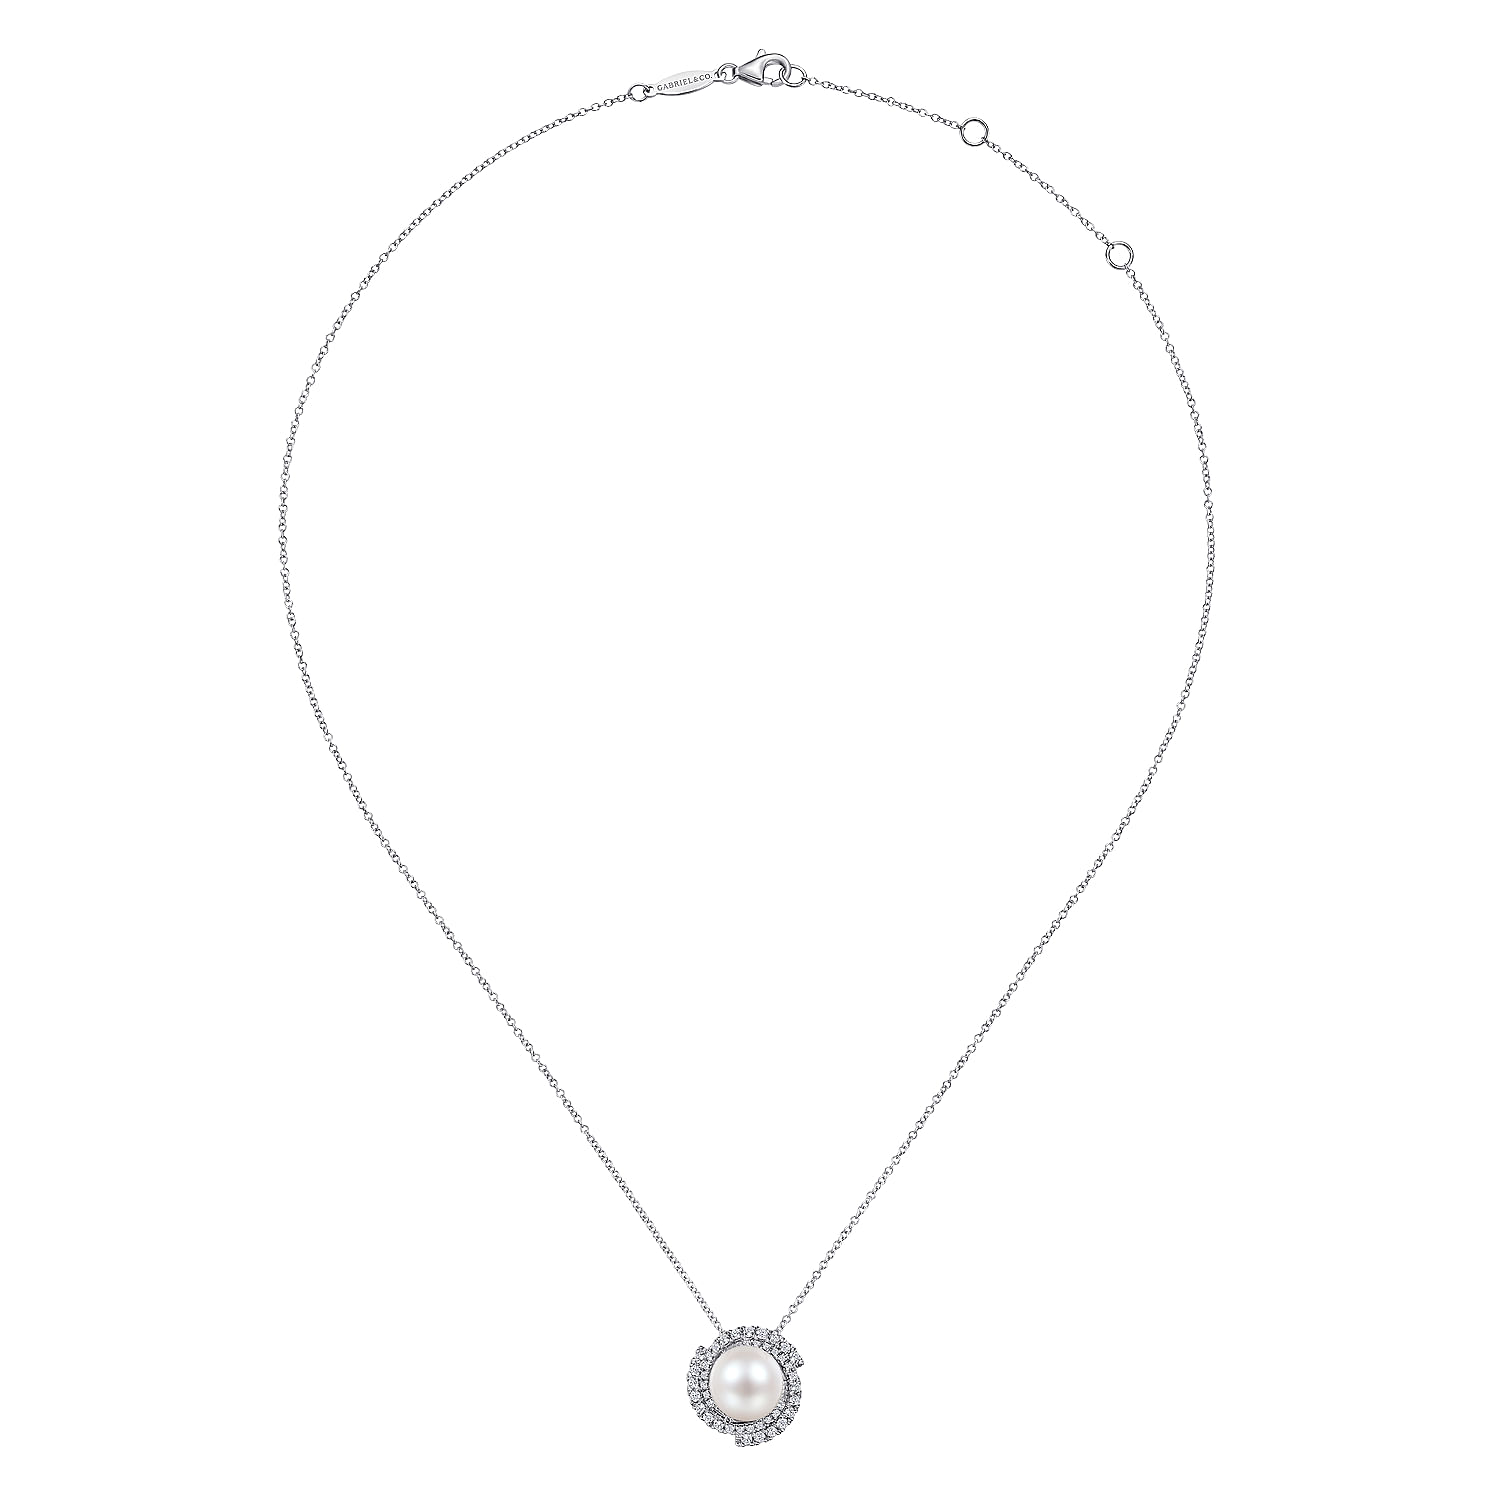 14K White Gold Round Cultured Pearl Swirling Diamond Halo Pendant Necklace